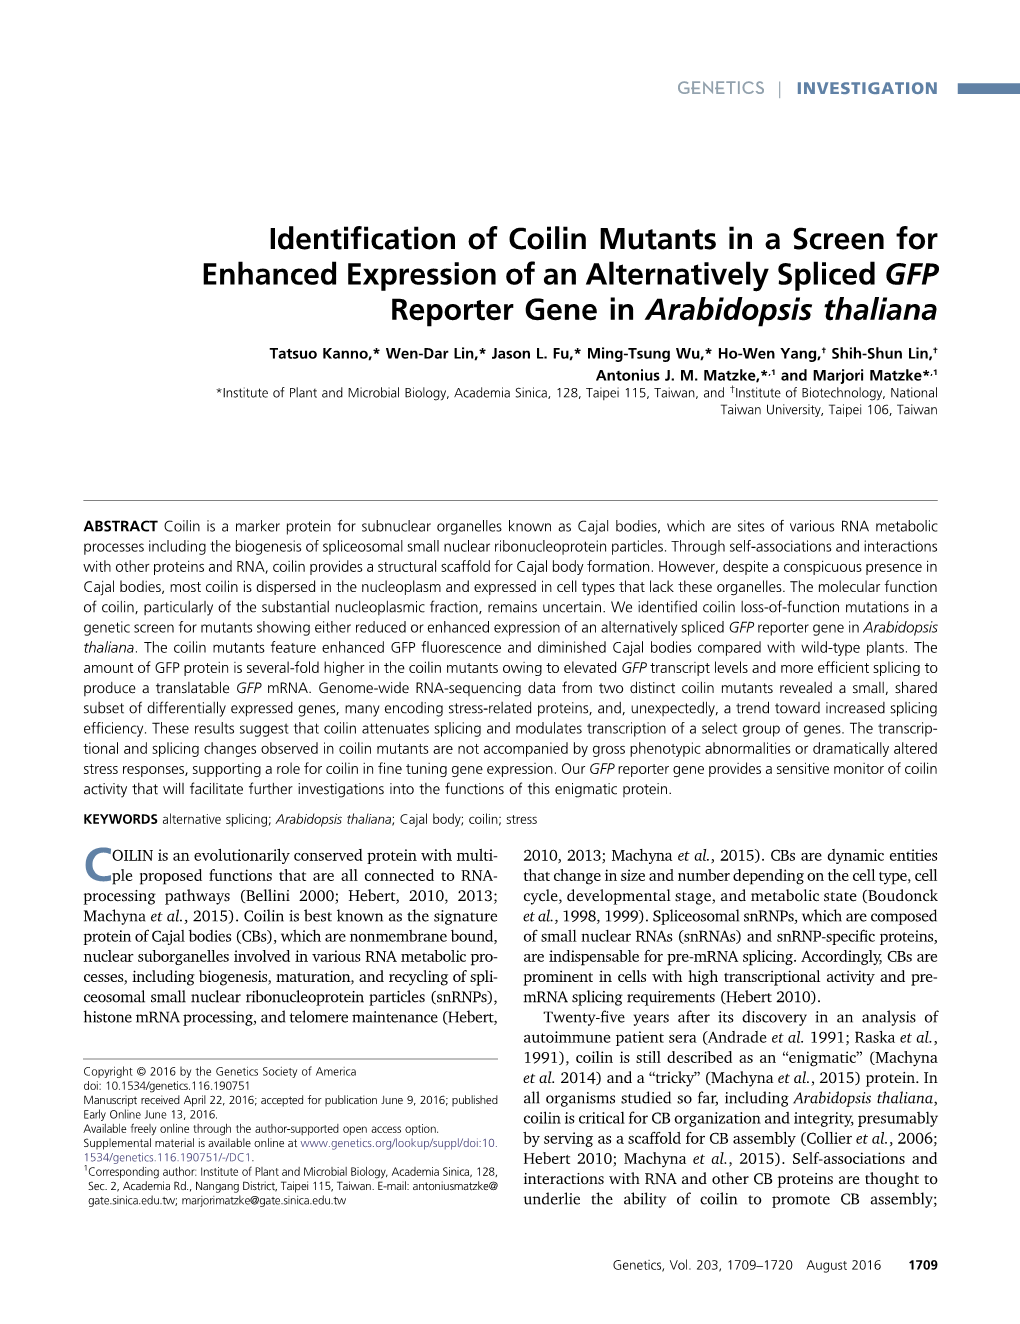 Identification of Coilin Mutants in a Screen for Enhanced Expression Of